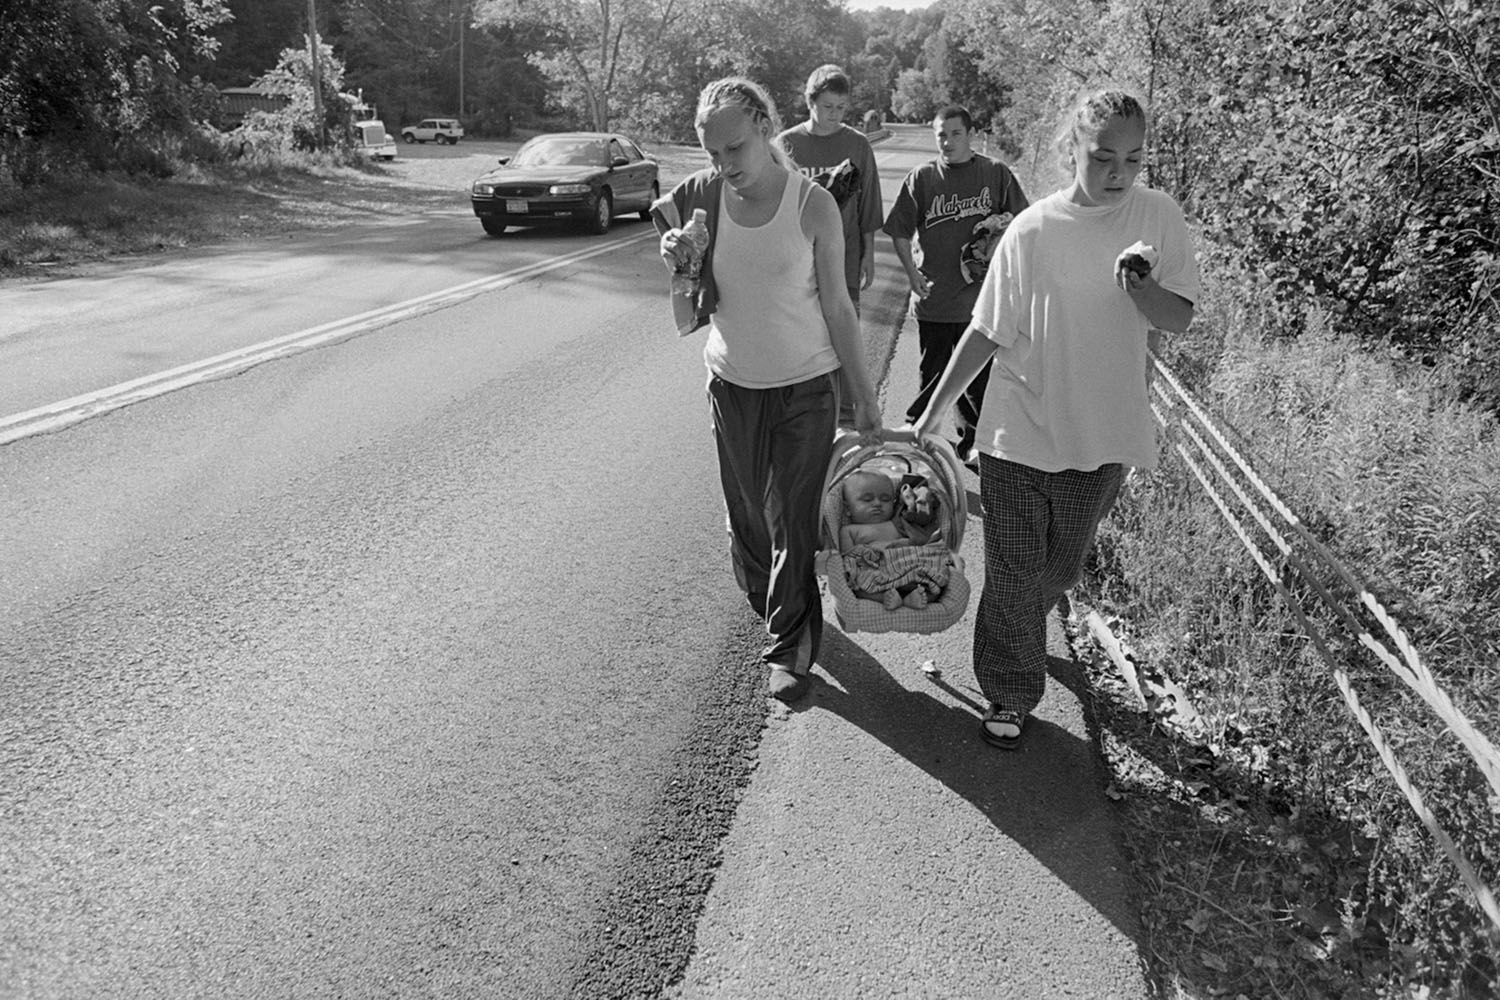 Kayla and Sabrina and their boyfriends take turns carrying Donny down Route 2 to the local swimming hole. Donny is part of an extended family of teens from the girls' North Troy neighborhood.